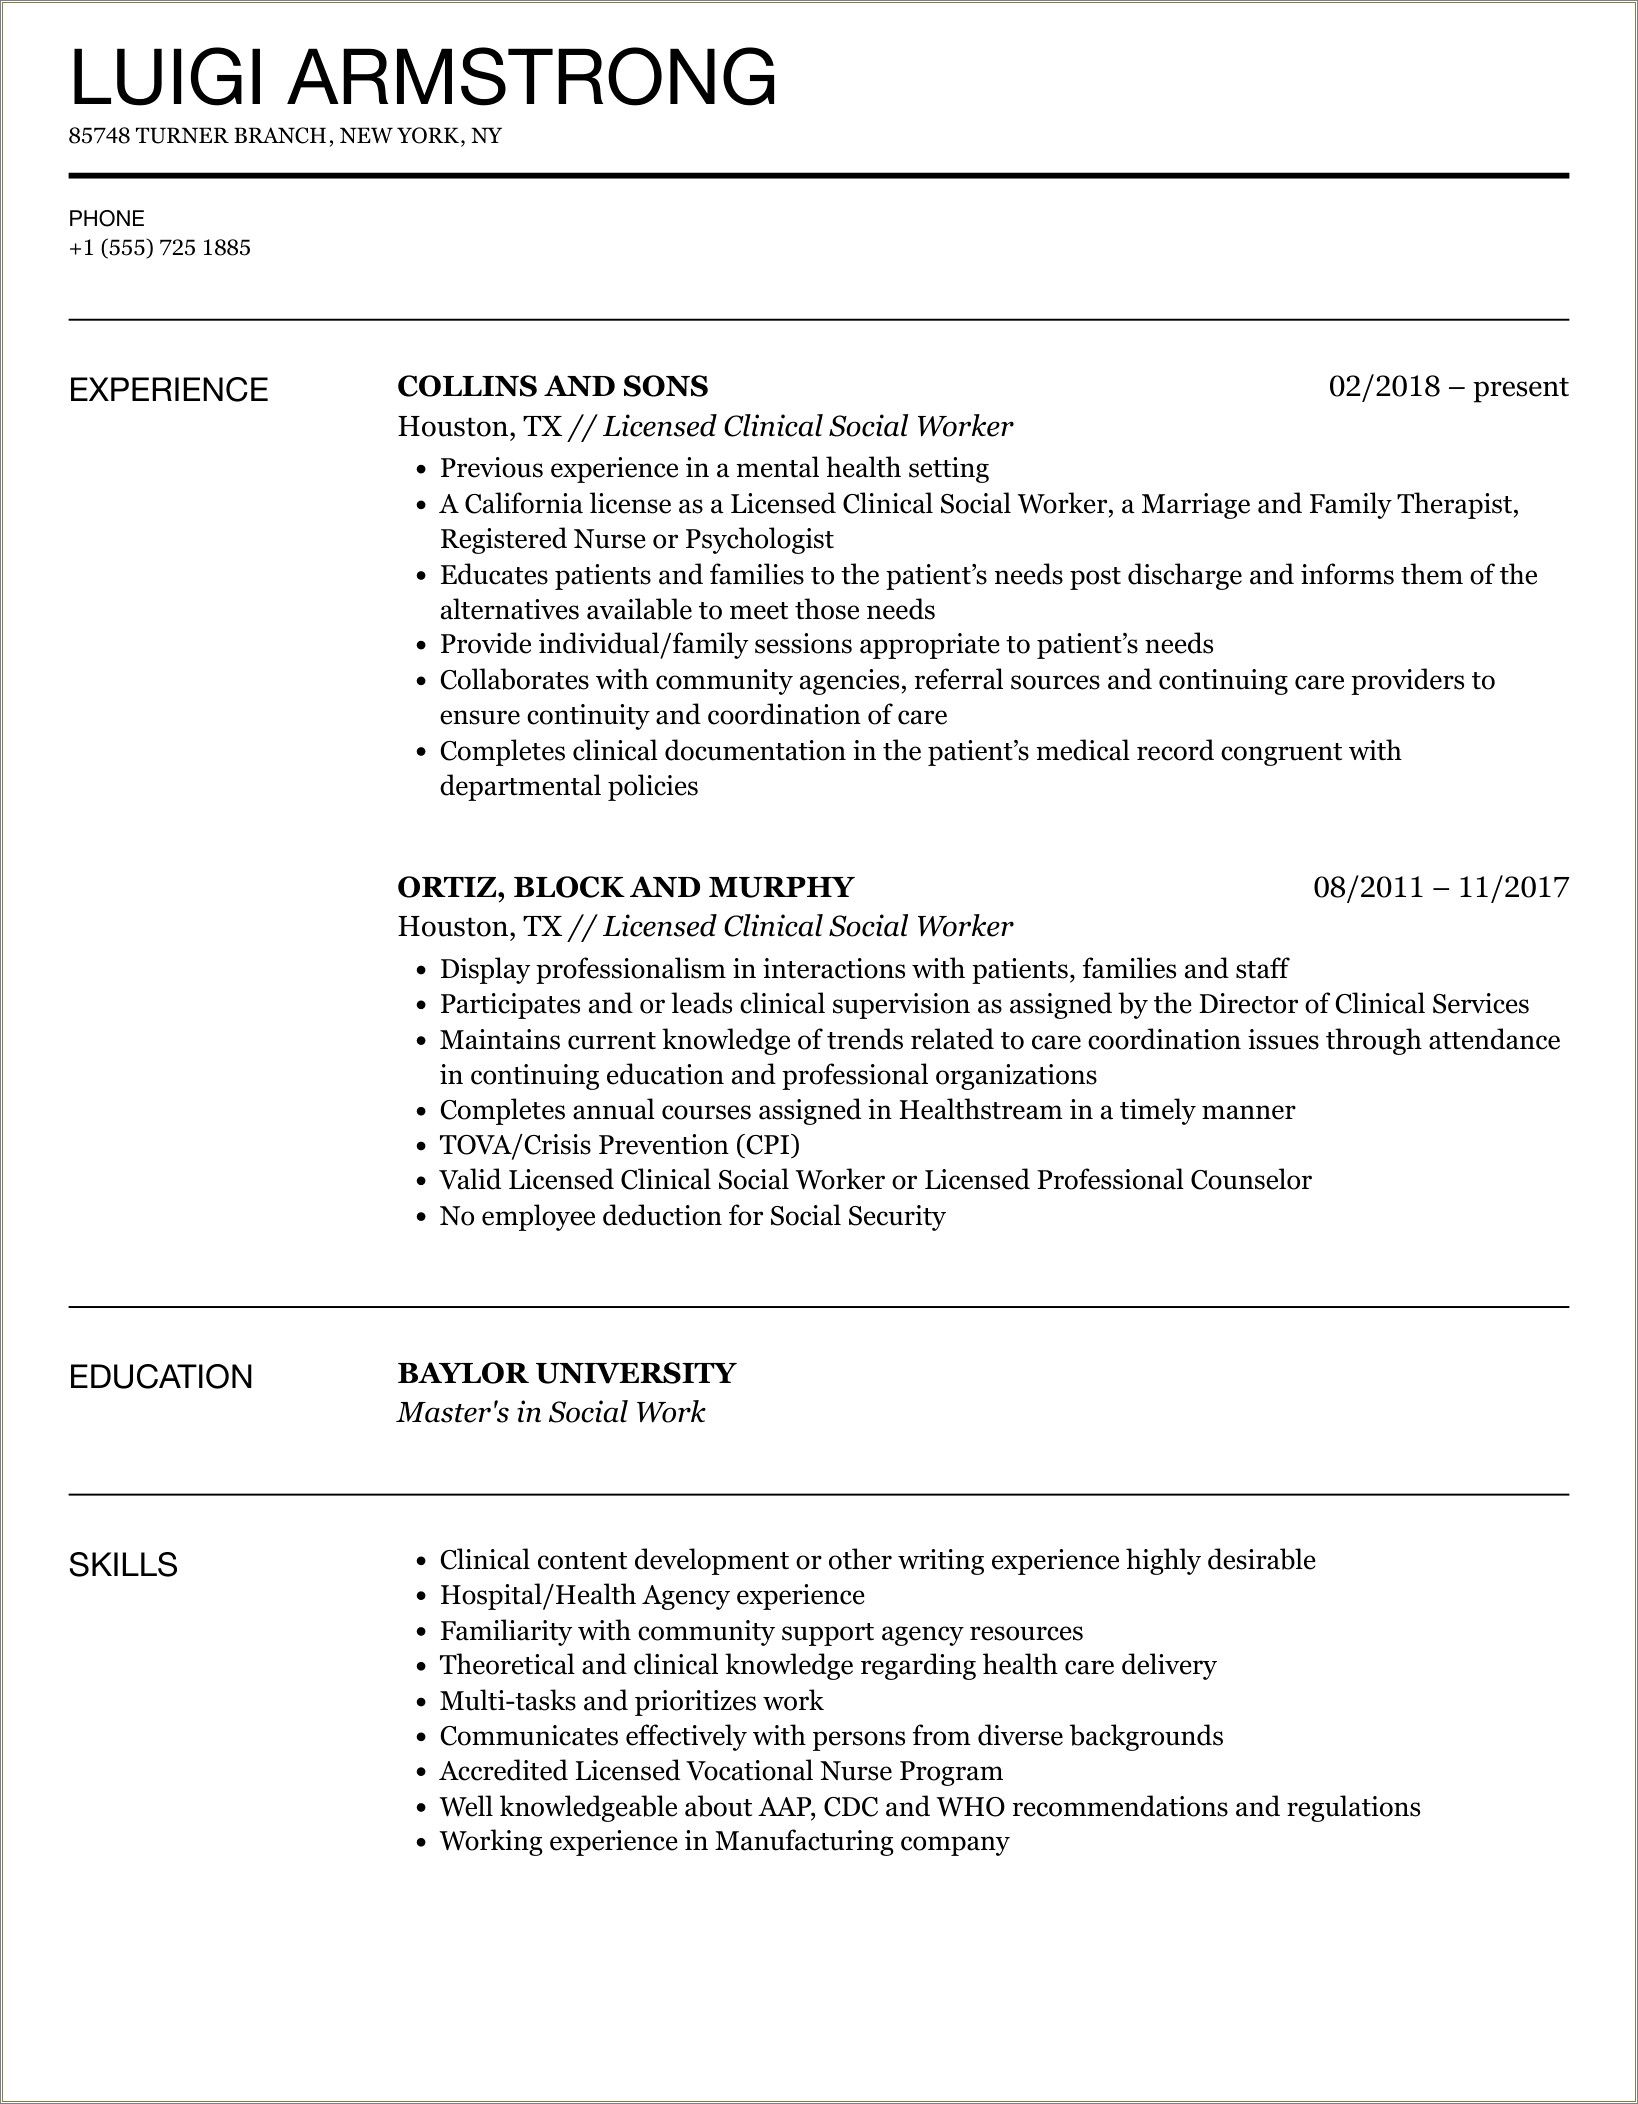 Resume For No Experience Socual Worker Chemical Dependency